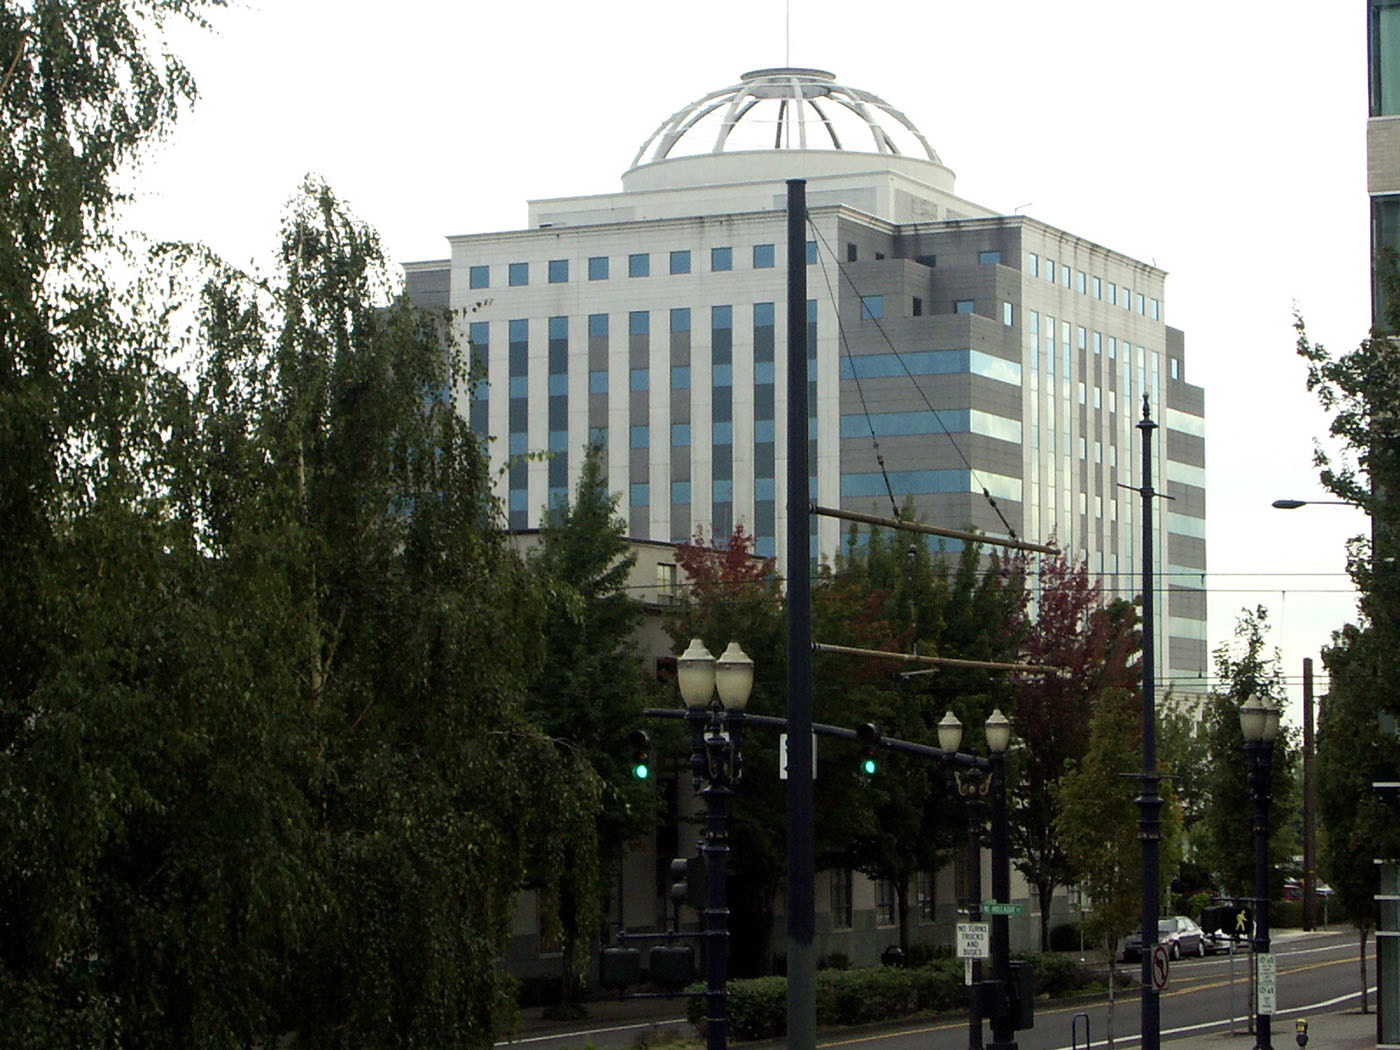 The Portland State Office Building.